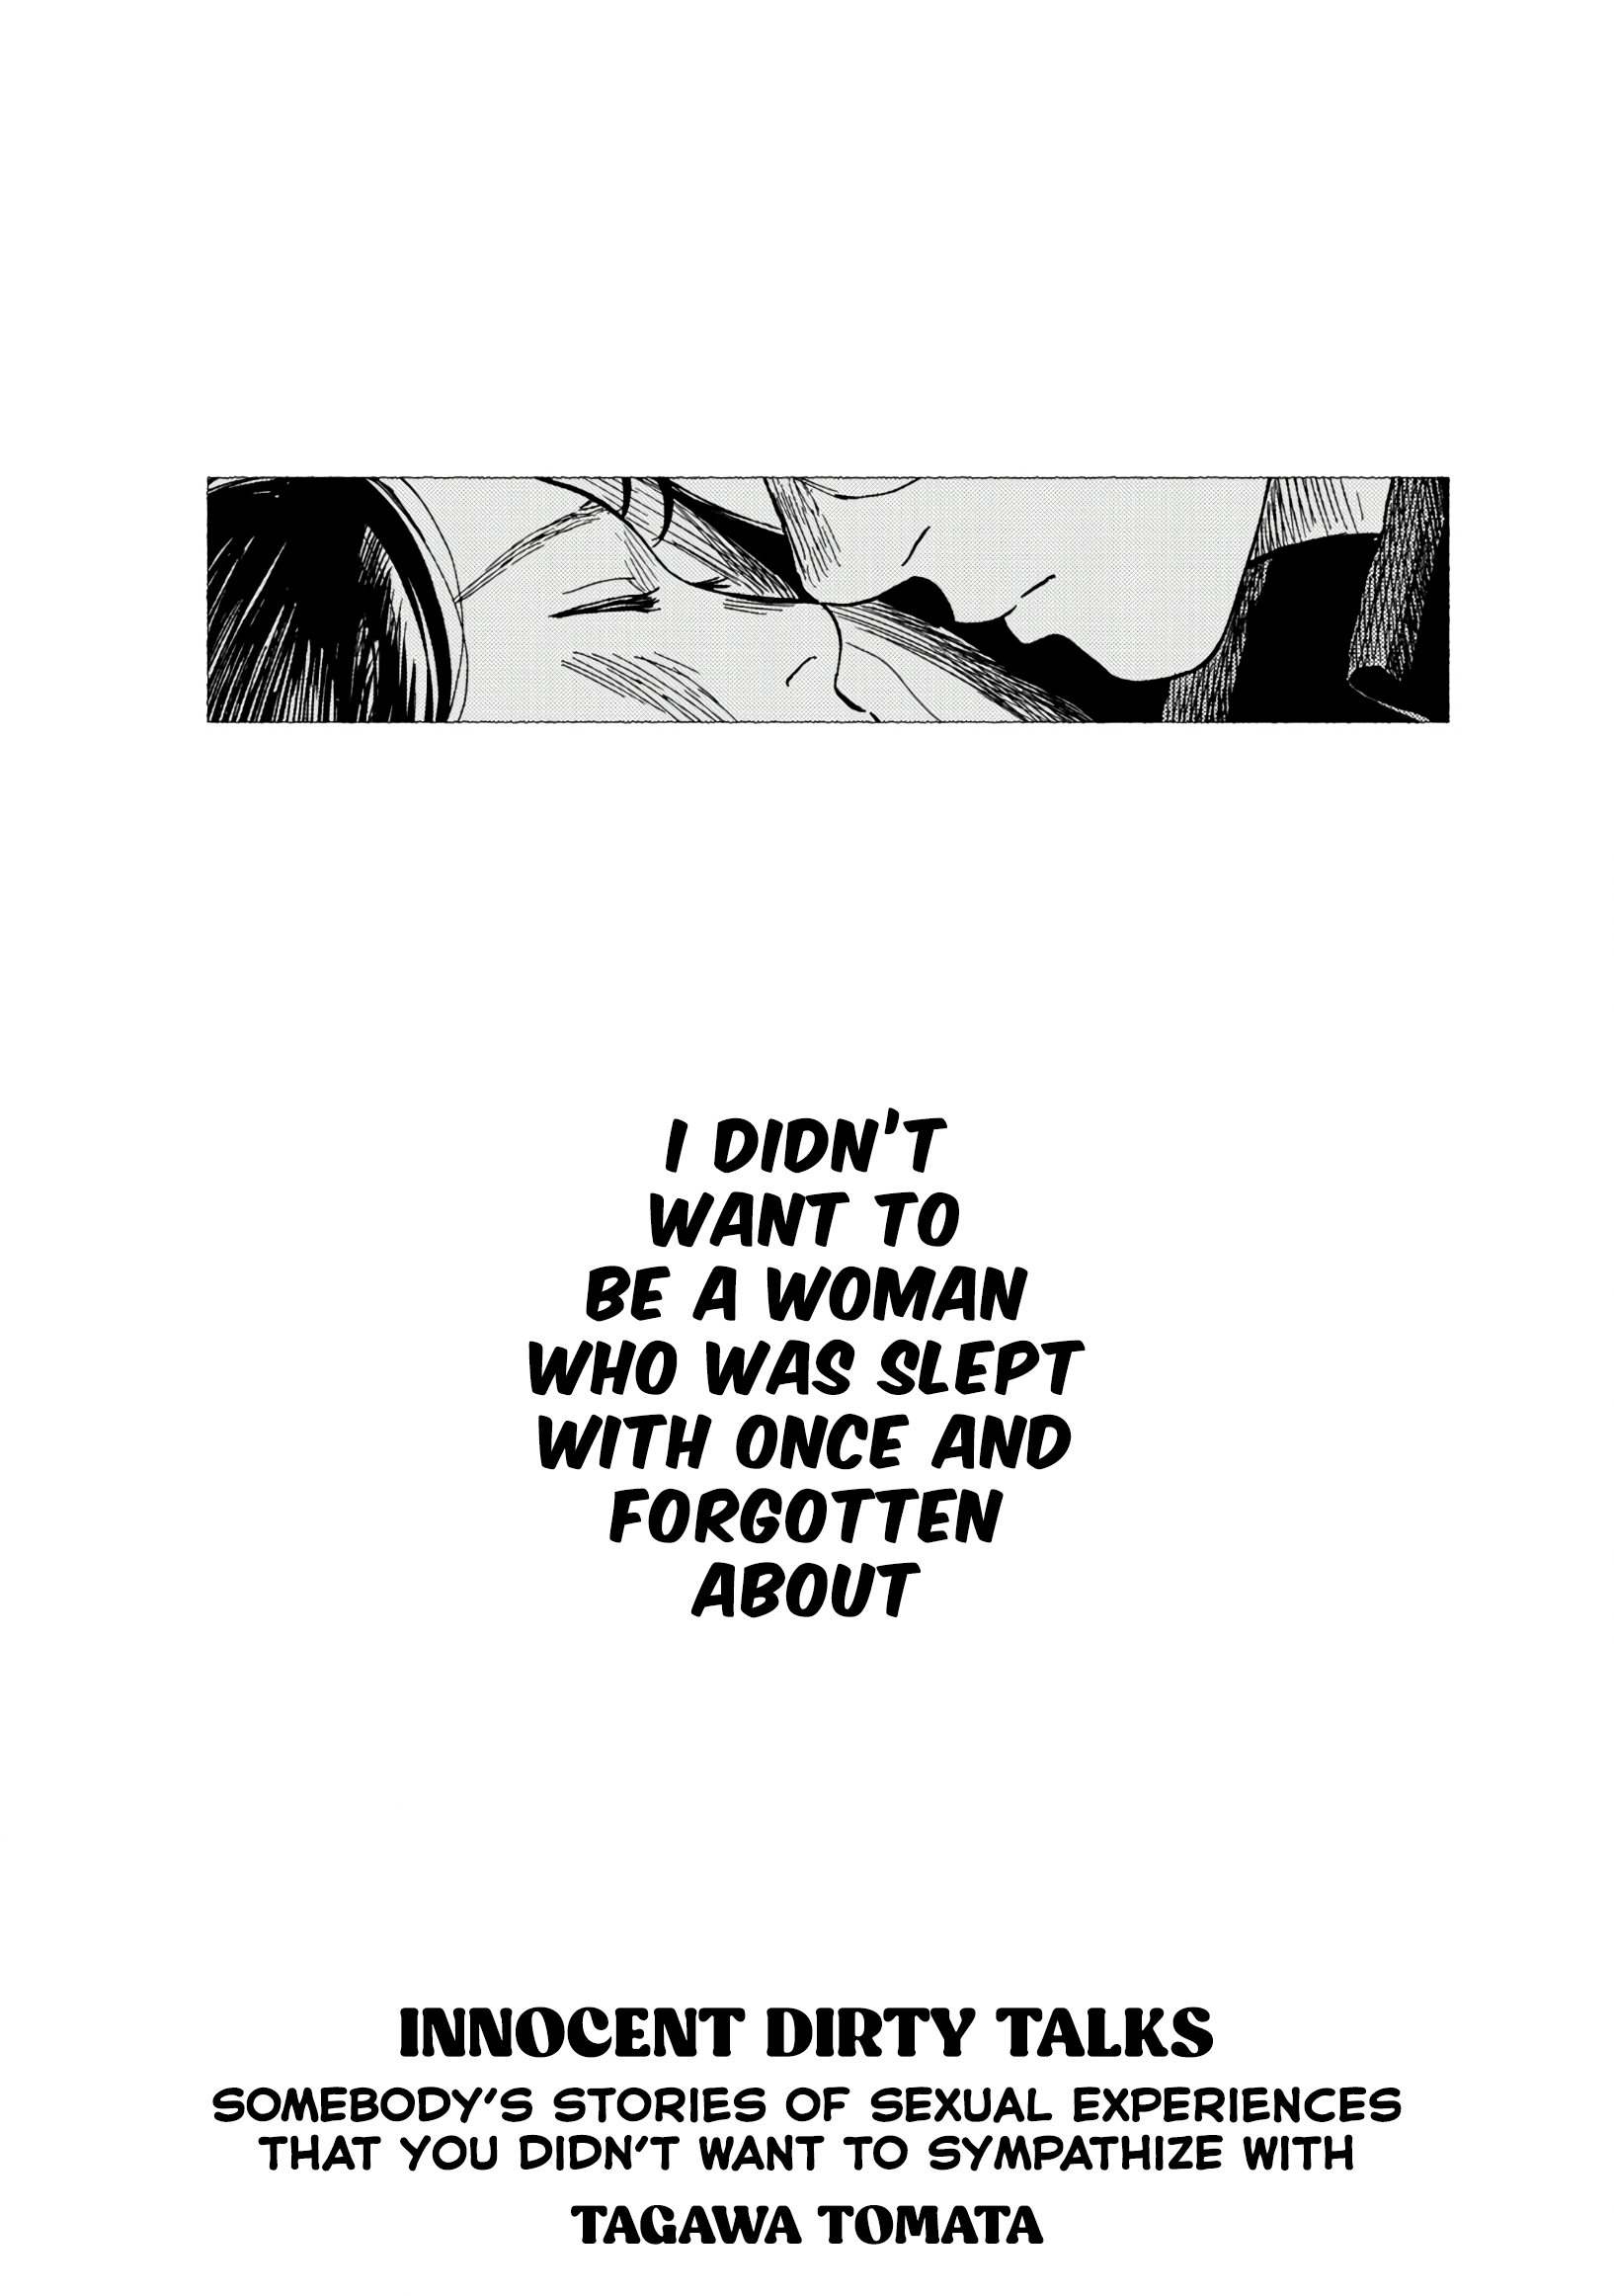 Jun Waidan Vol.1 Chapter 4: I Didn't Want To Be A Woman Who Was Slept With Once And Forgotten About - Picture 1